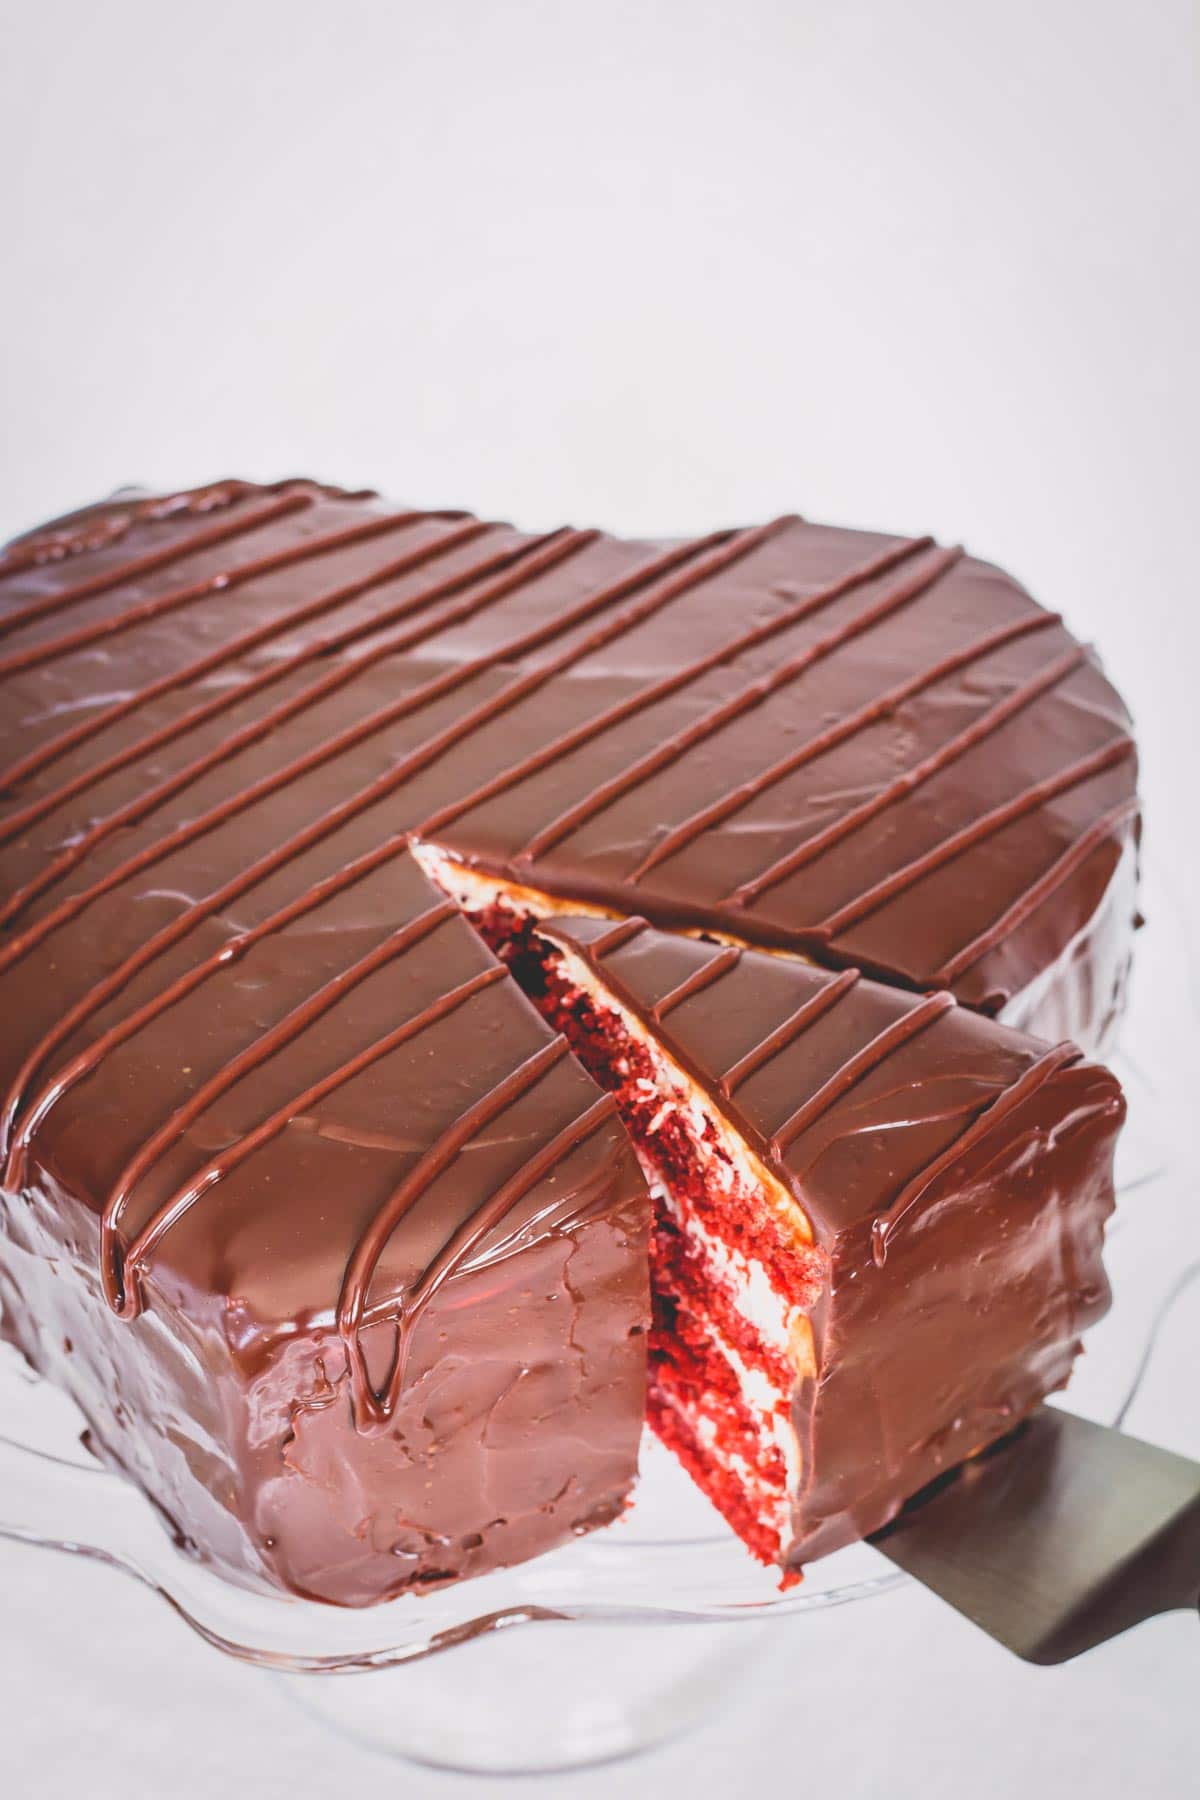 Heart shaped chocolate covered red velvet cake on a glass platter with a slice cut.